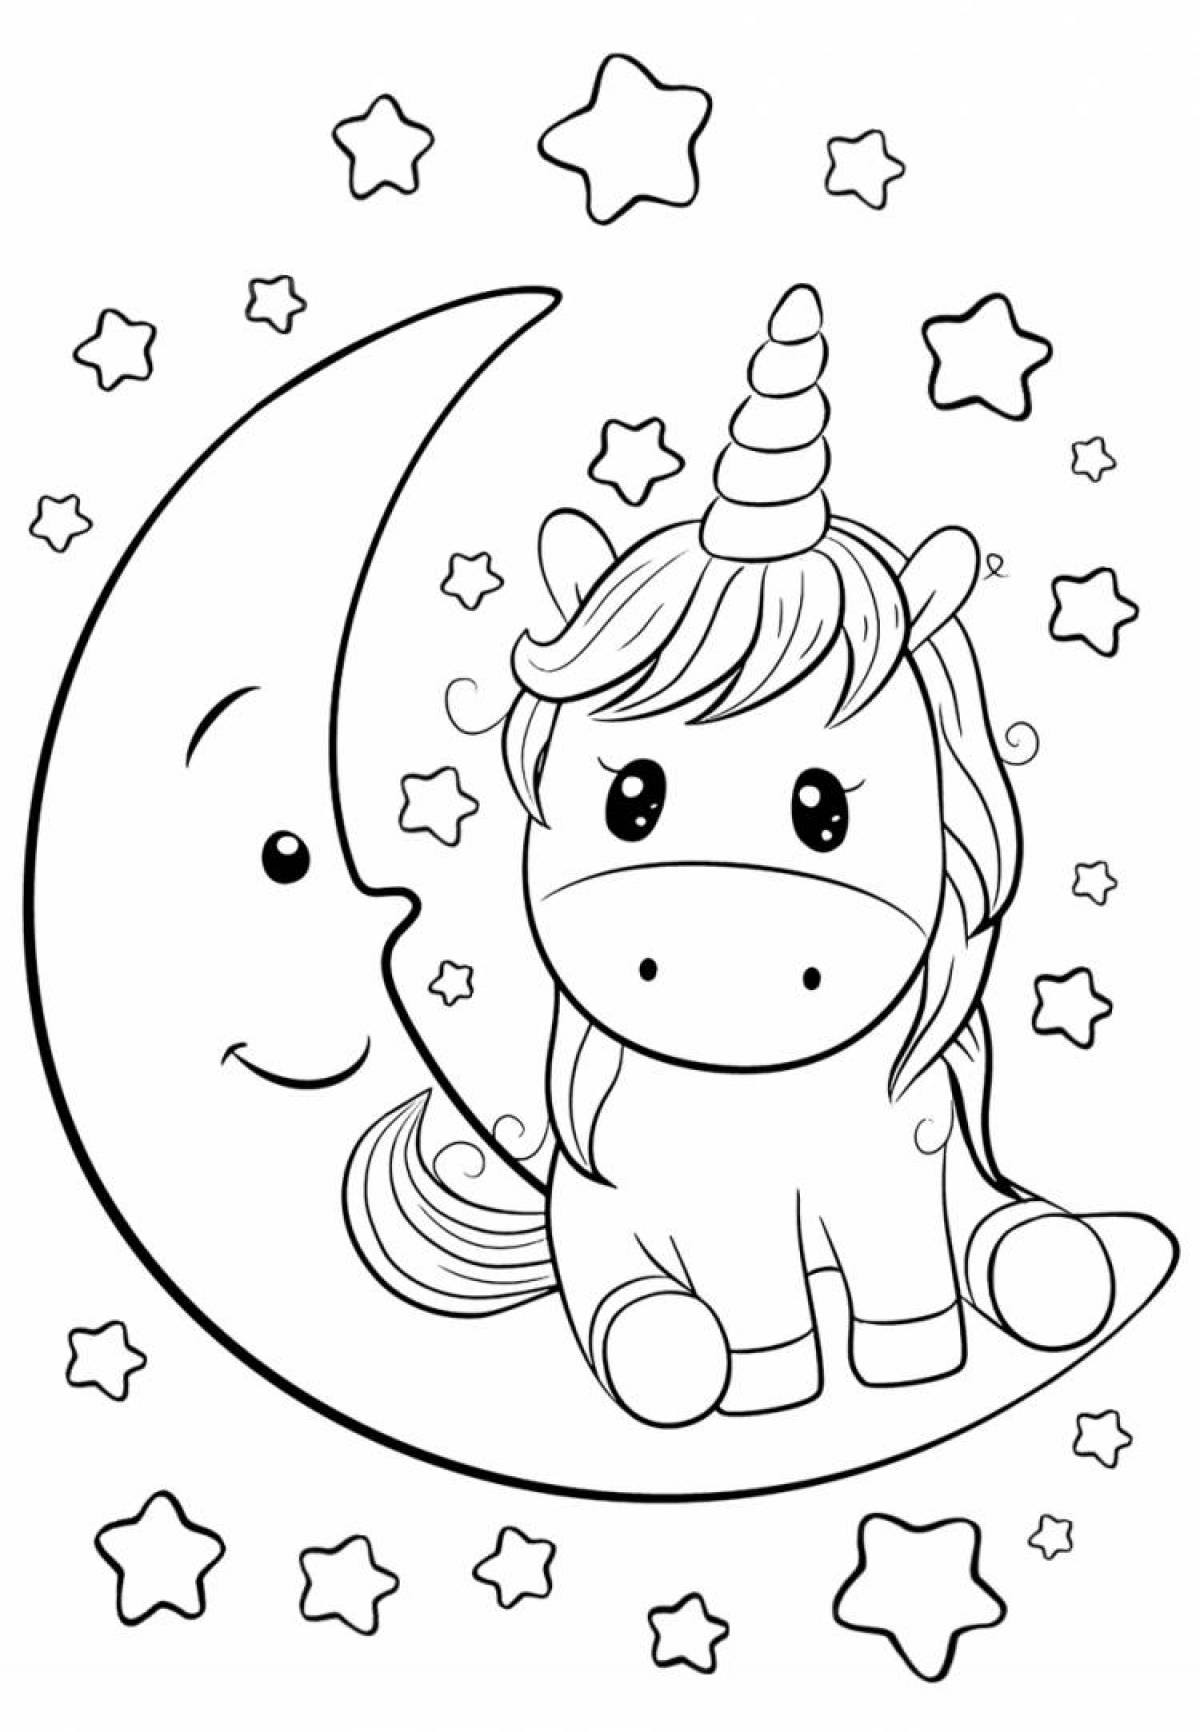 Glorious unicorn coloring pages for girls